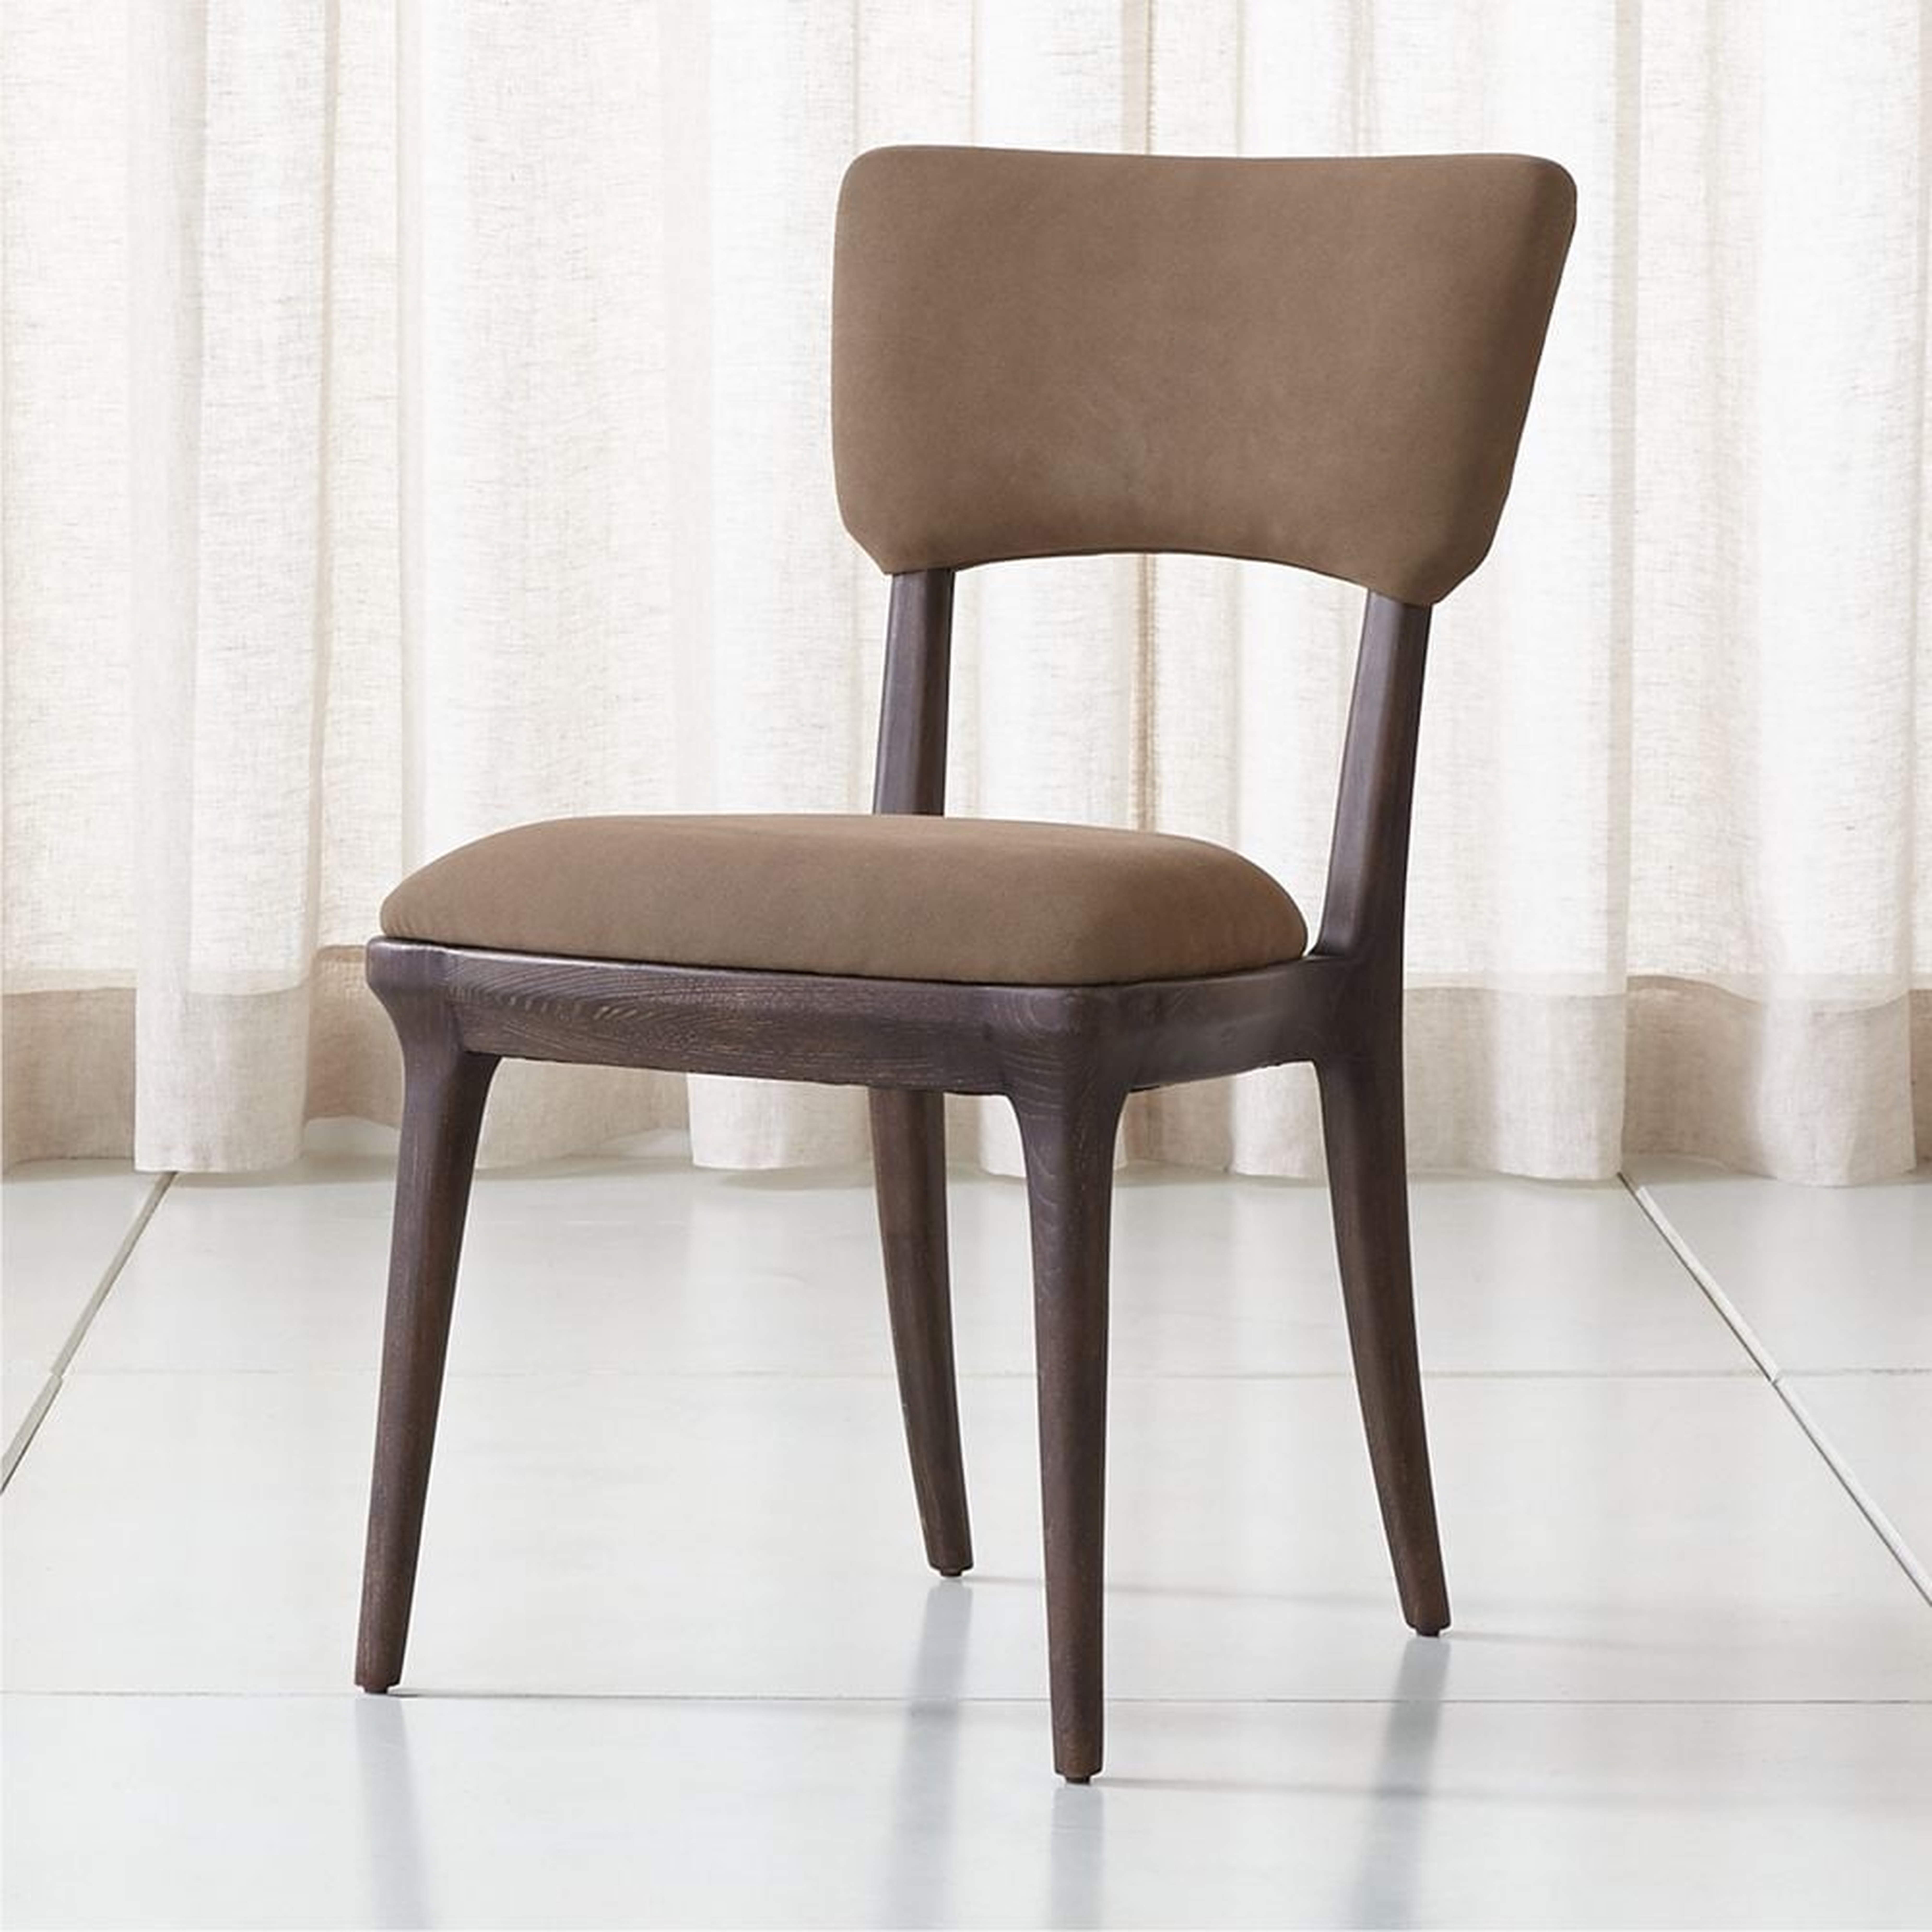 Flynn Dining Chair - Crate and Barrel